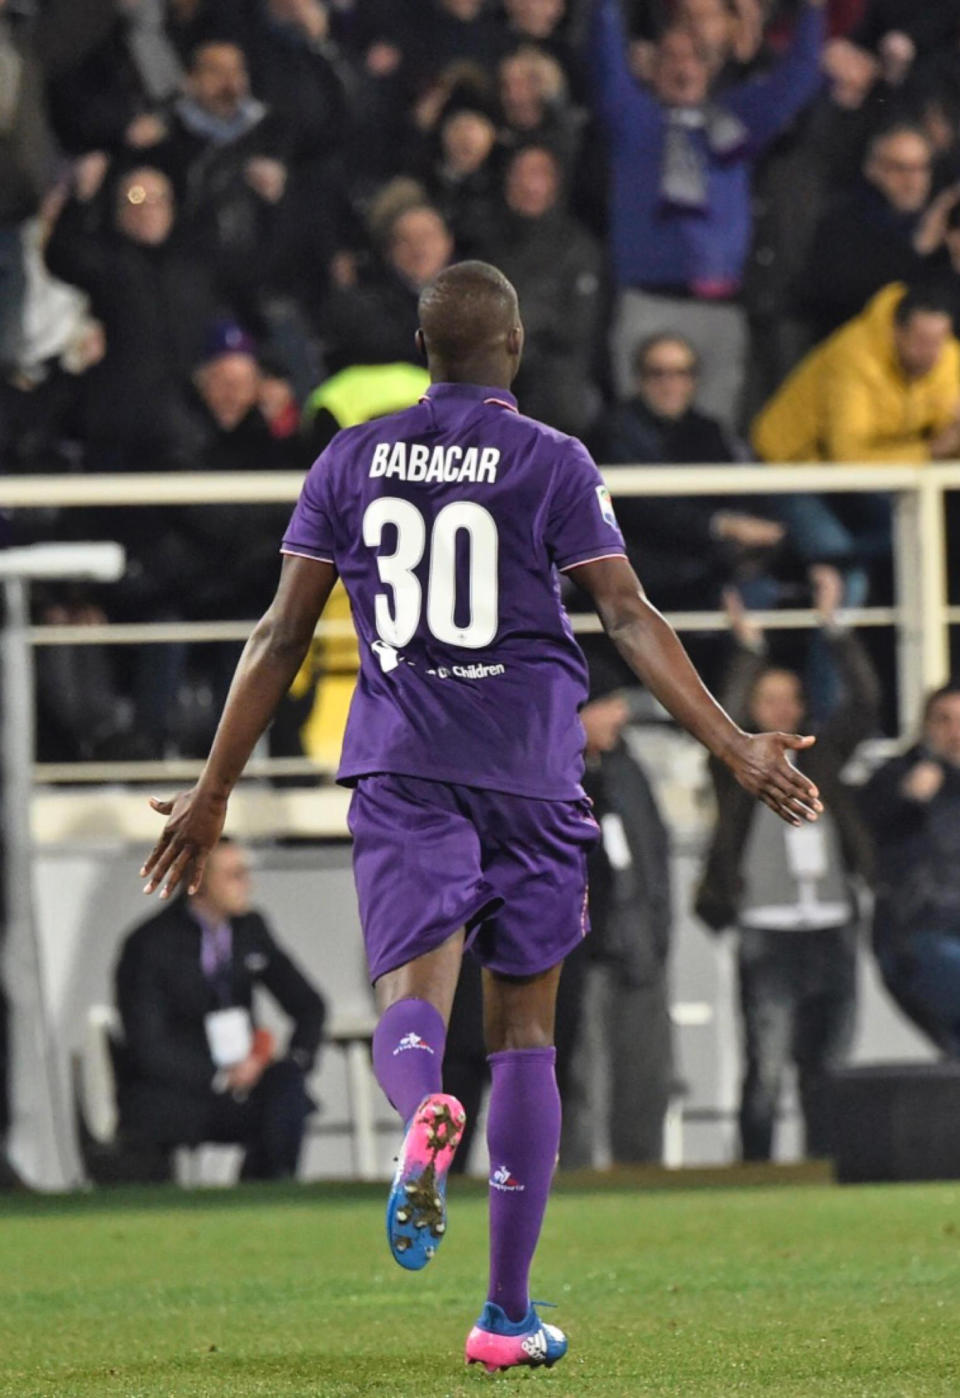 Fiorentina's Khouma Babacar celebrates after scoring during the Italian Serie A soccer match between Fiorentina and Udinese at the Artemio Franchi stadium in Florence, Italy, Feb. 11 2017. (Maurizio Degl'Innocenti/ANSA via AP)